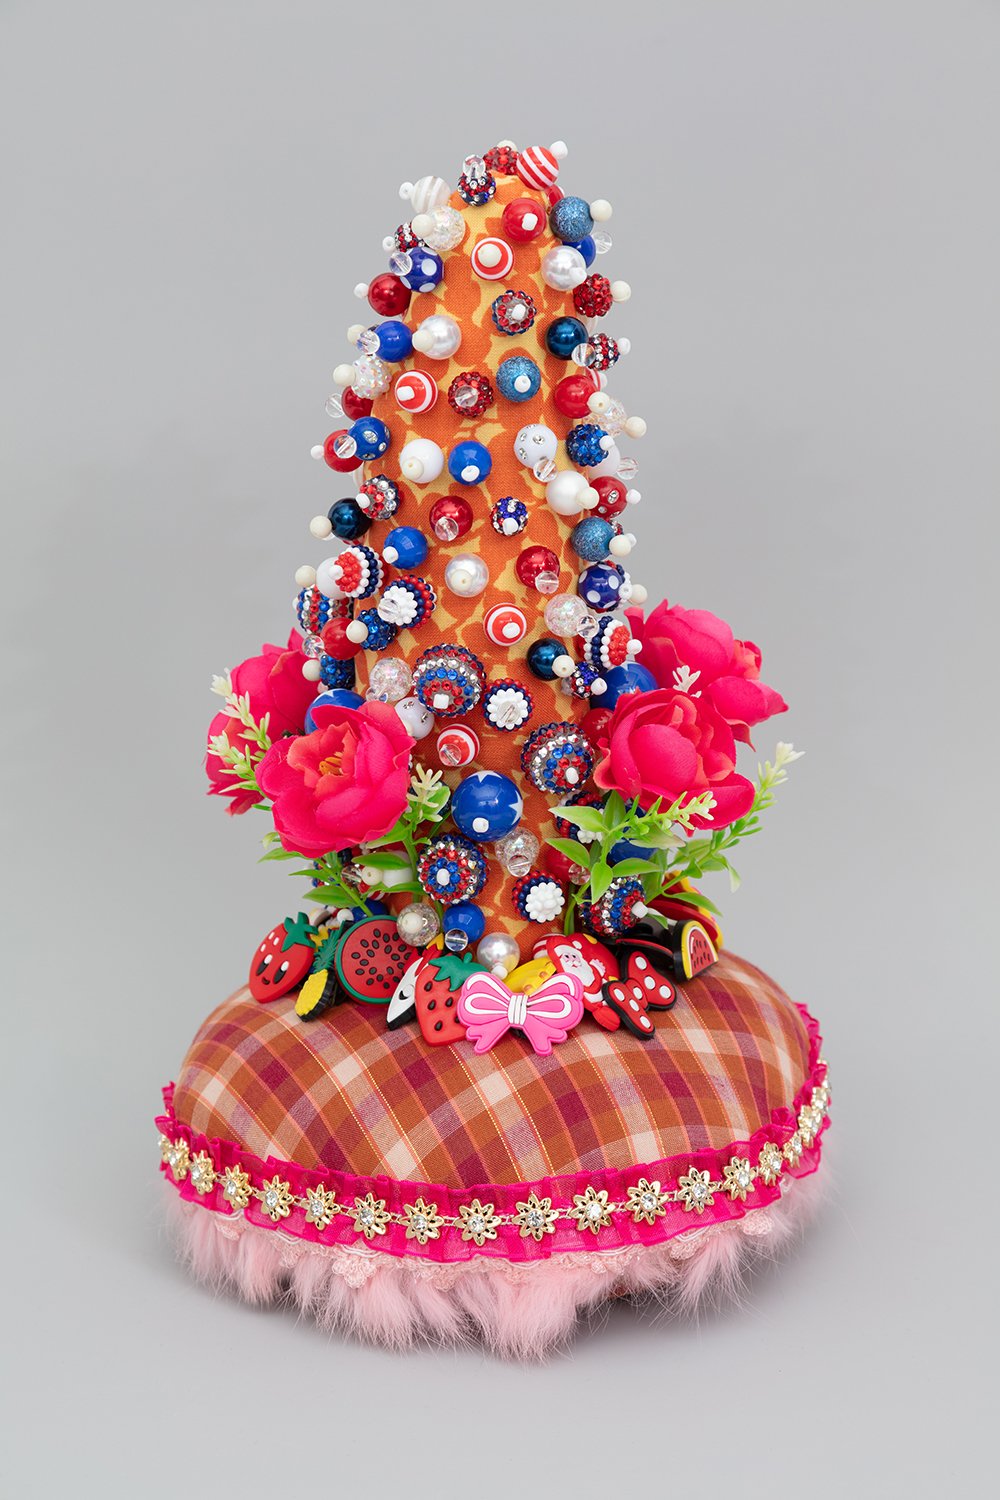   Untitled , 2022, Plastic beads, found fabric, trim, charms, fabric and plastic flowers, polyester batting, thread, 12.5 x 8.5 x 8.5” 